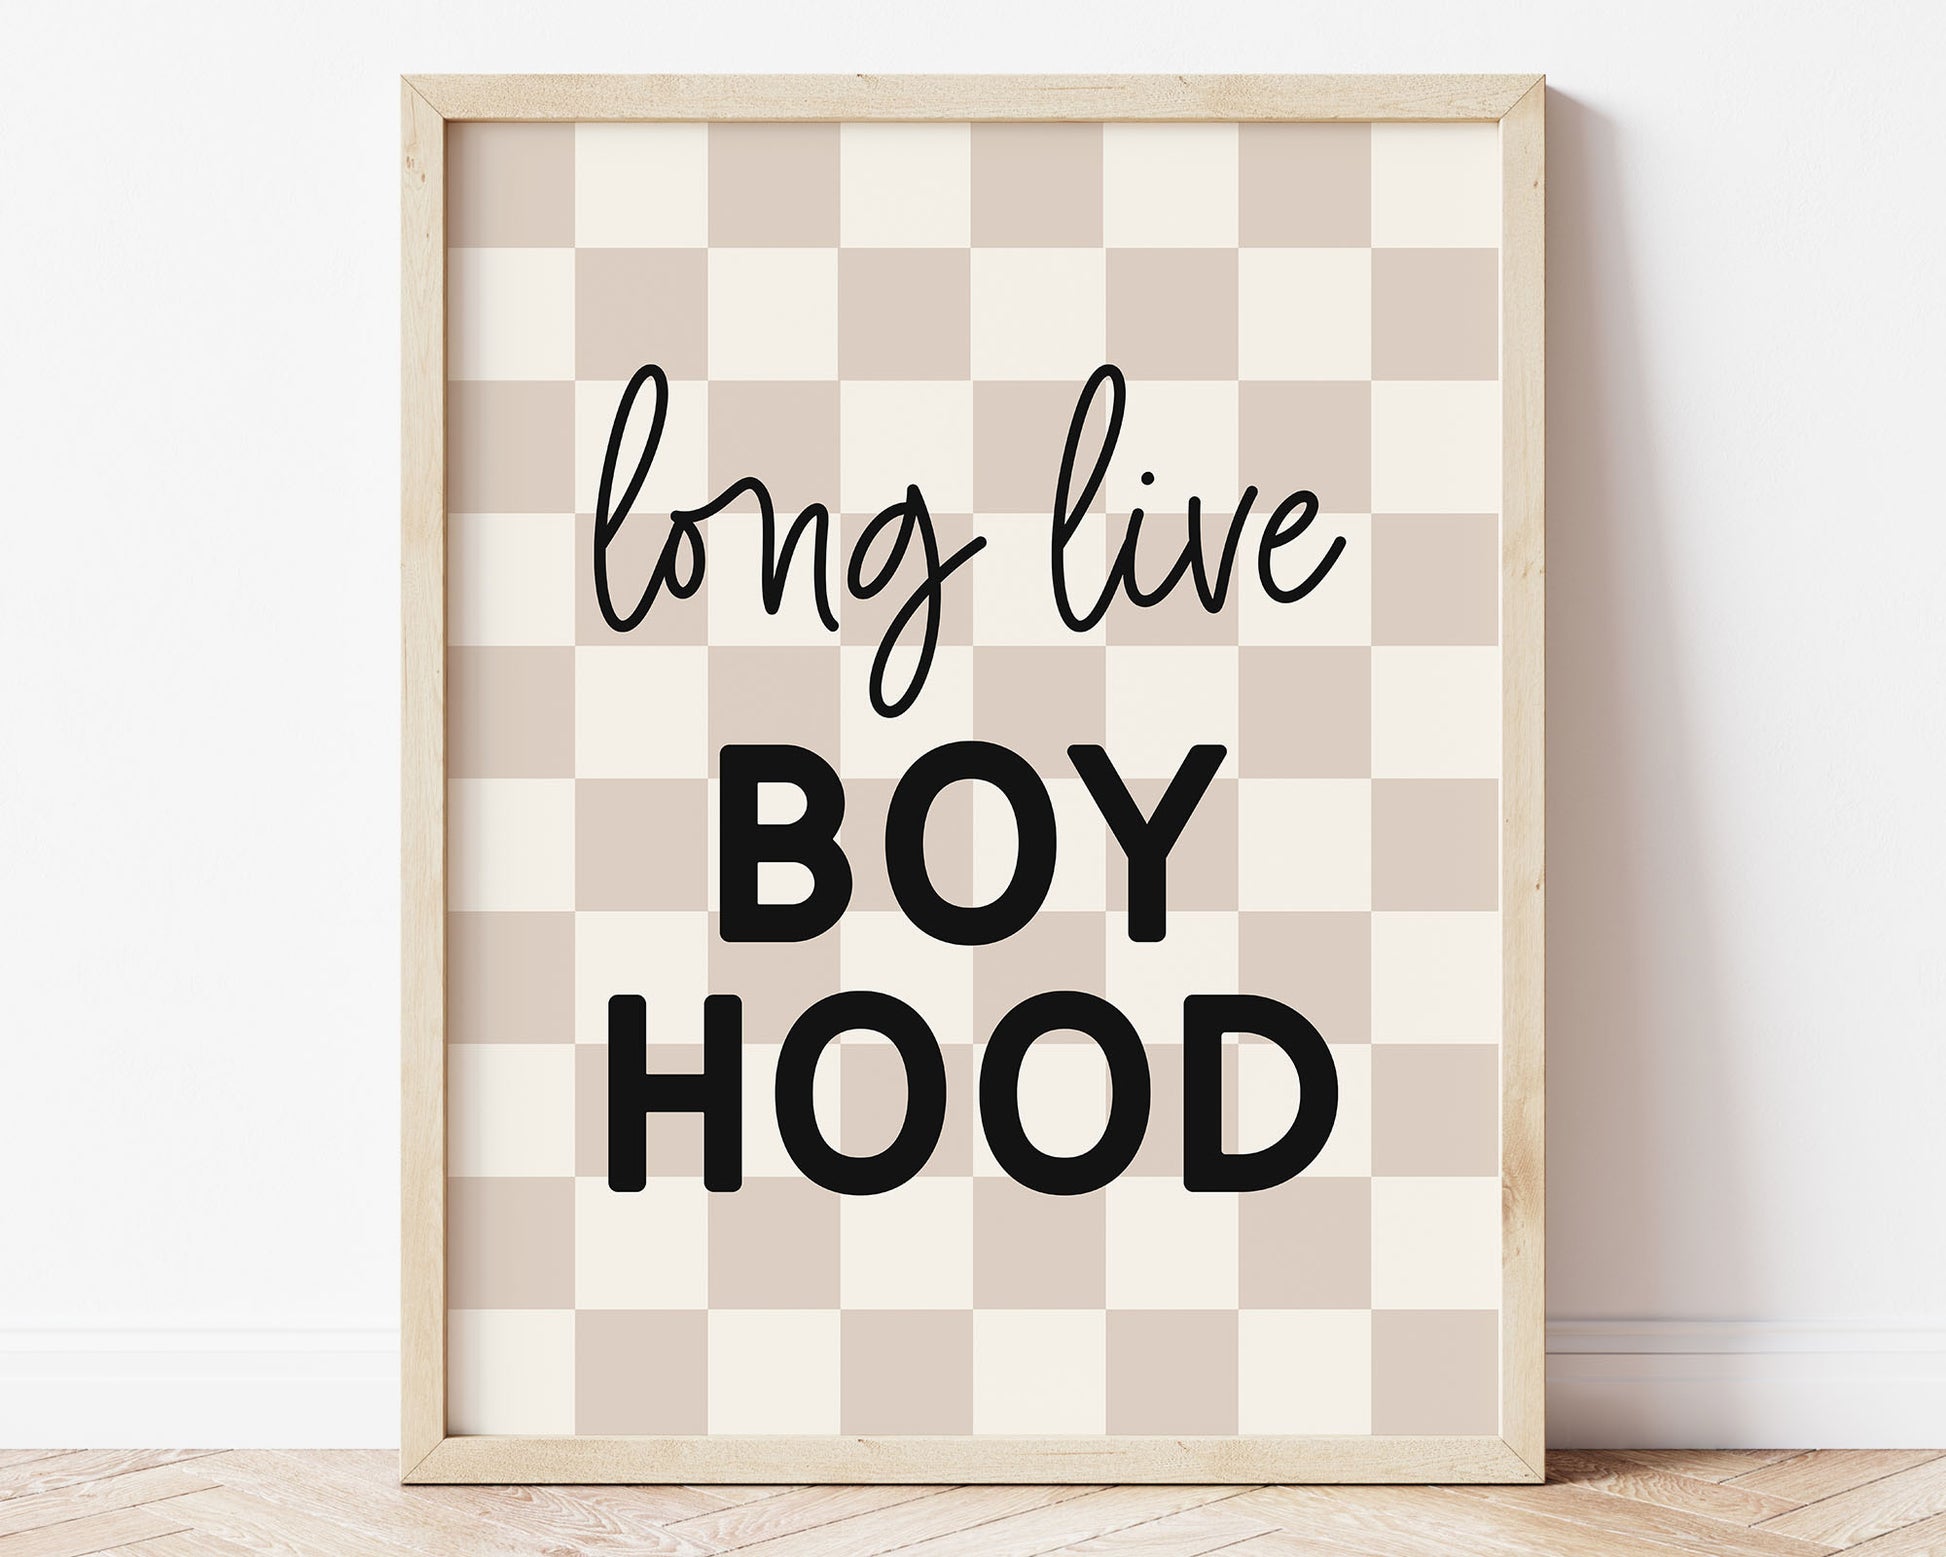 Long Live Boy Hood Printable Wall Art featuring cursive script and block lettering in black on a neutral tan and off white checkered background. Perfect for Baby Boy Nursery Decor, Toddler Boys Bedroom Decor or Children's Play Room Wall Art.